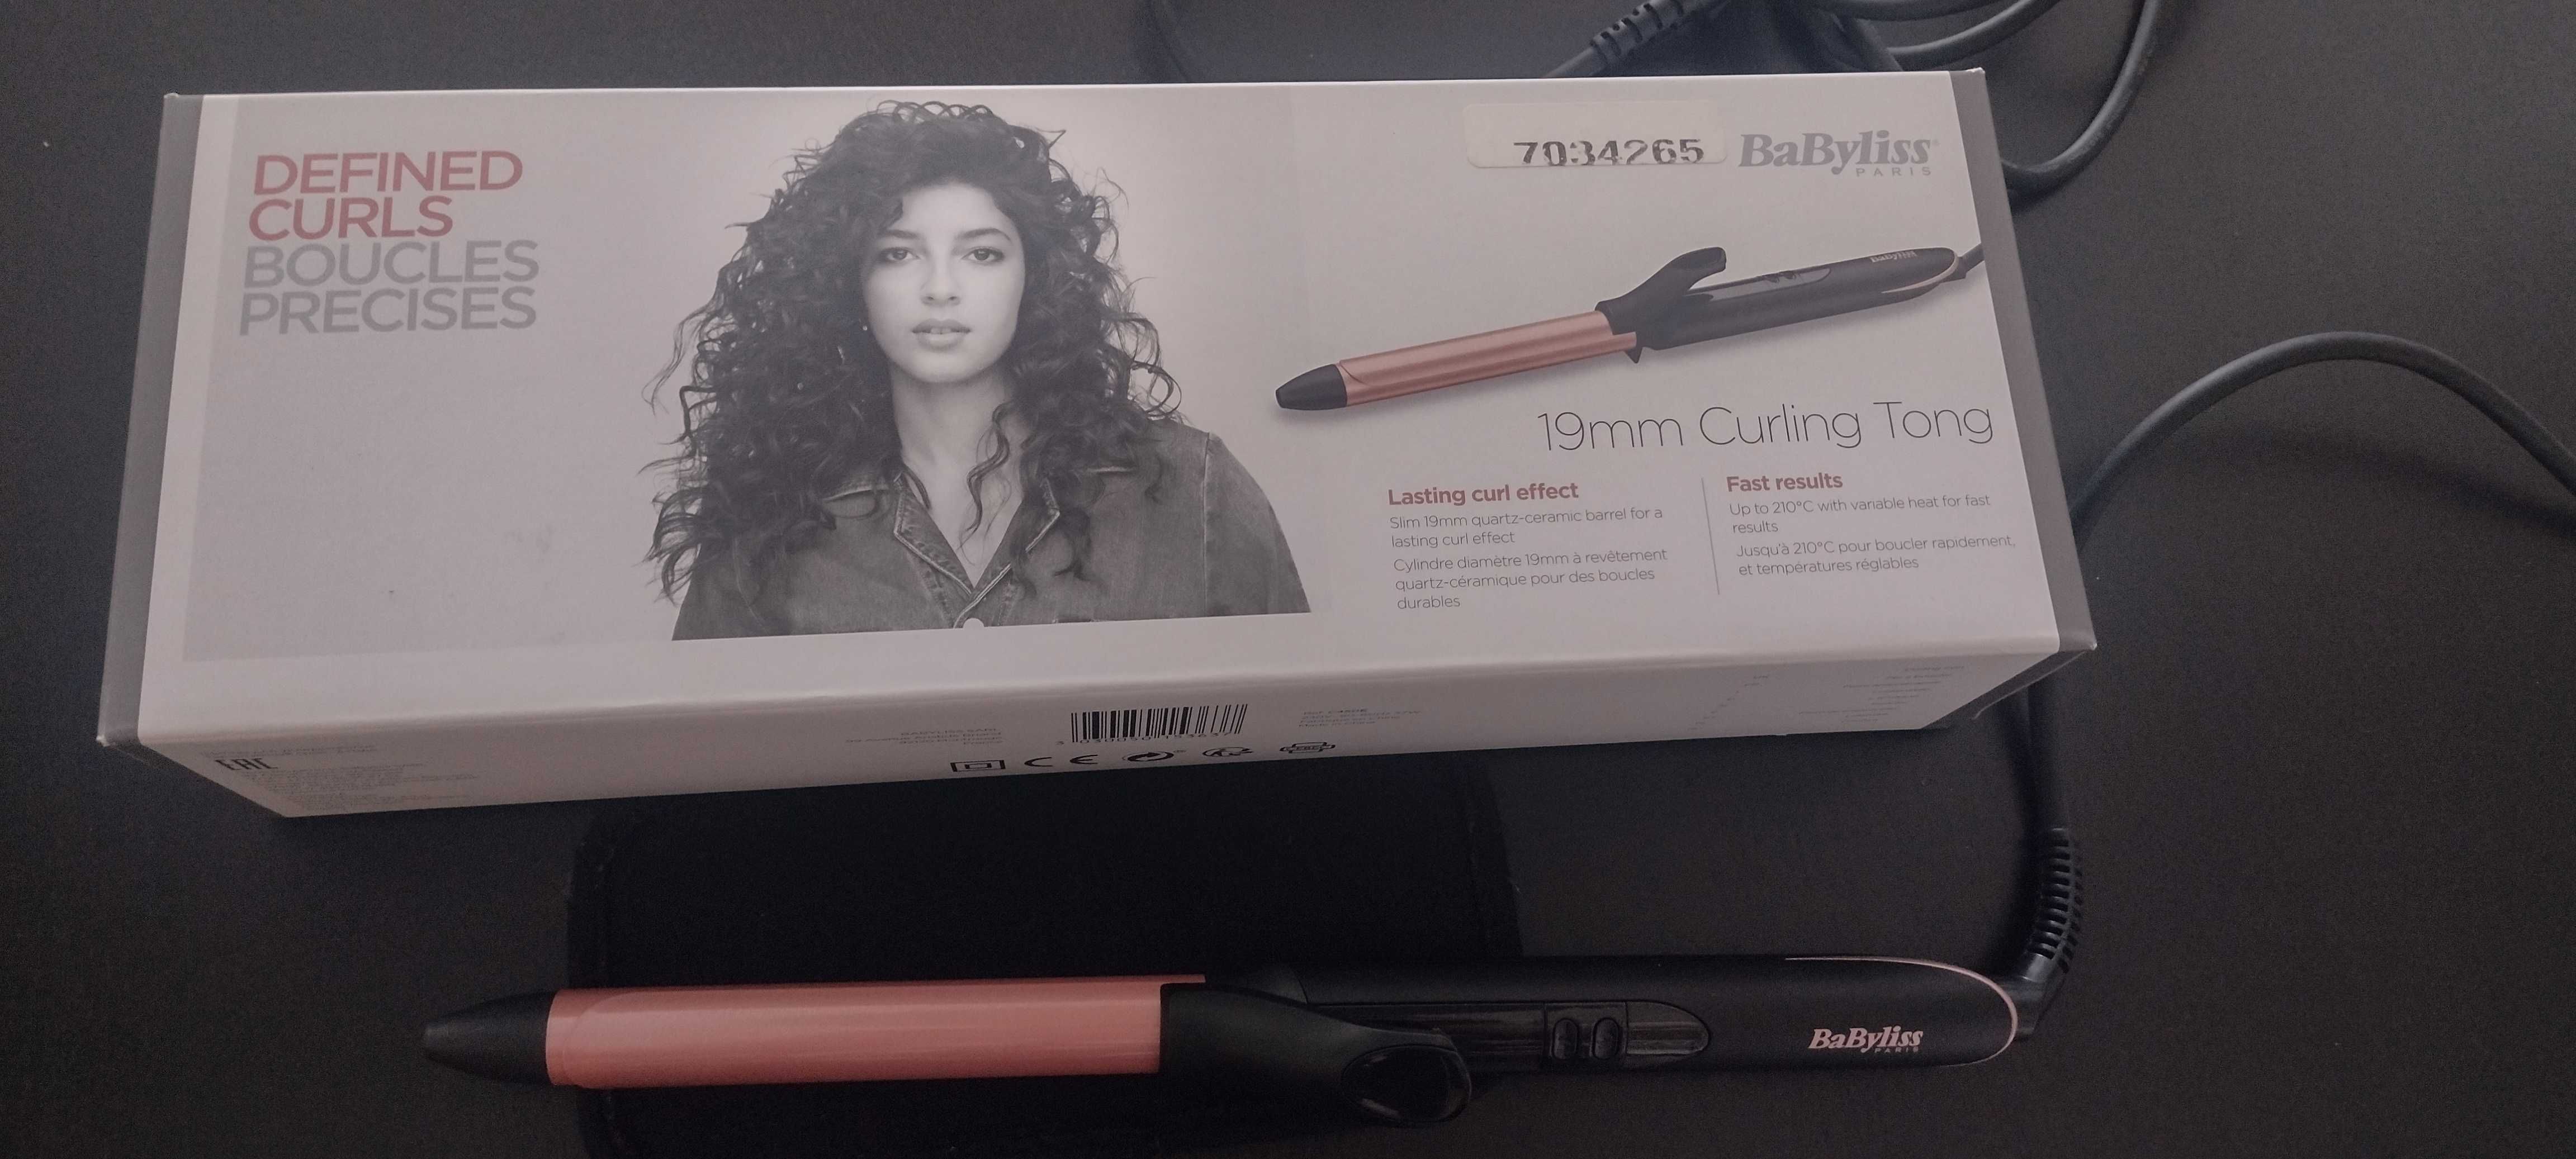 BaByliss 19mm Curling Tong